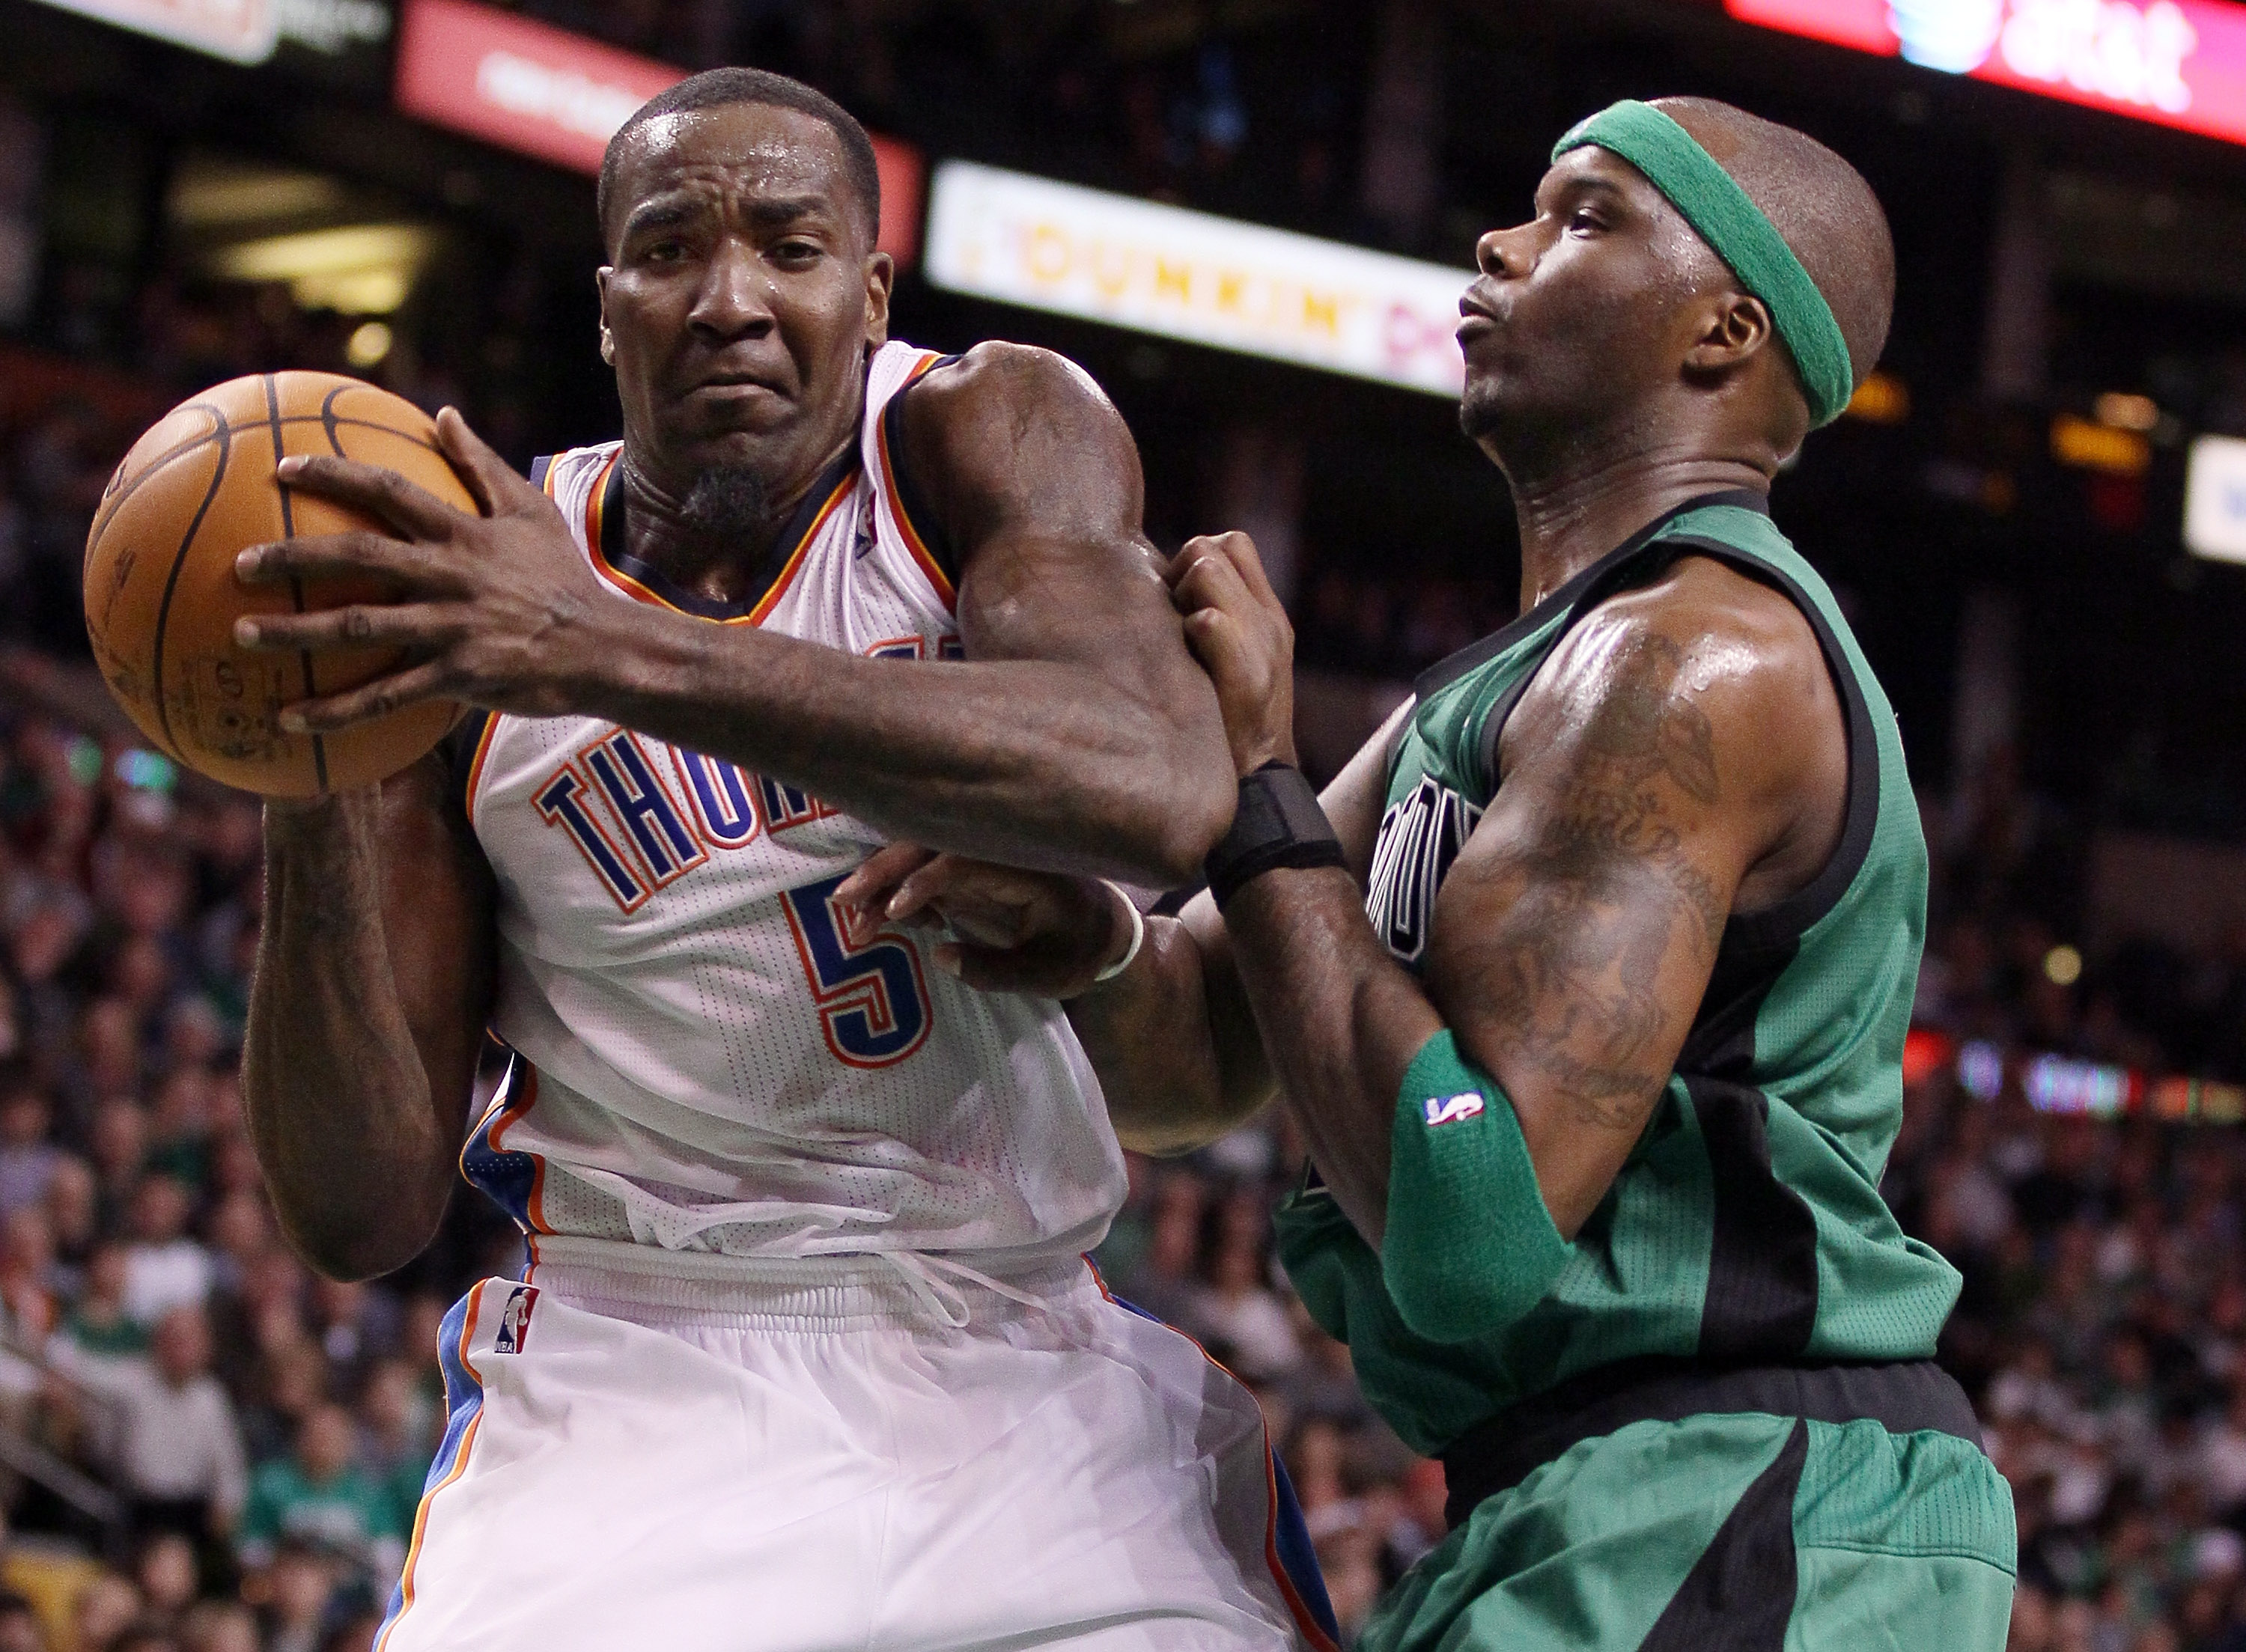 Kendrick Perkins On Leaving the Boston Celtics for the OKC Thunder: ‘It Was the Most Difficult Situation I’ve Been In’